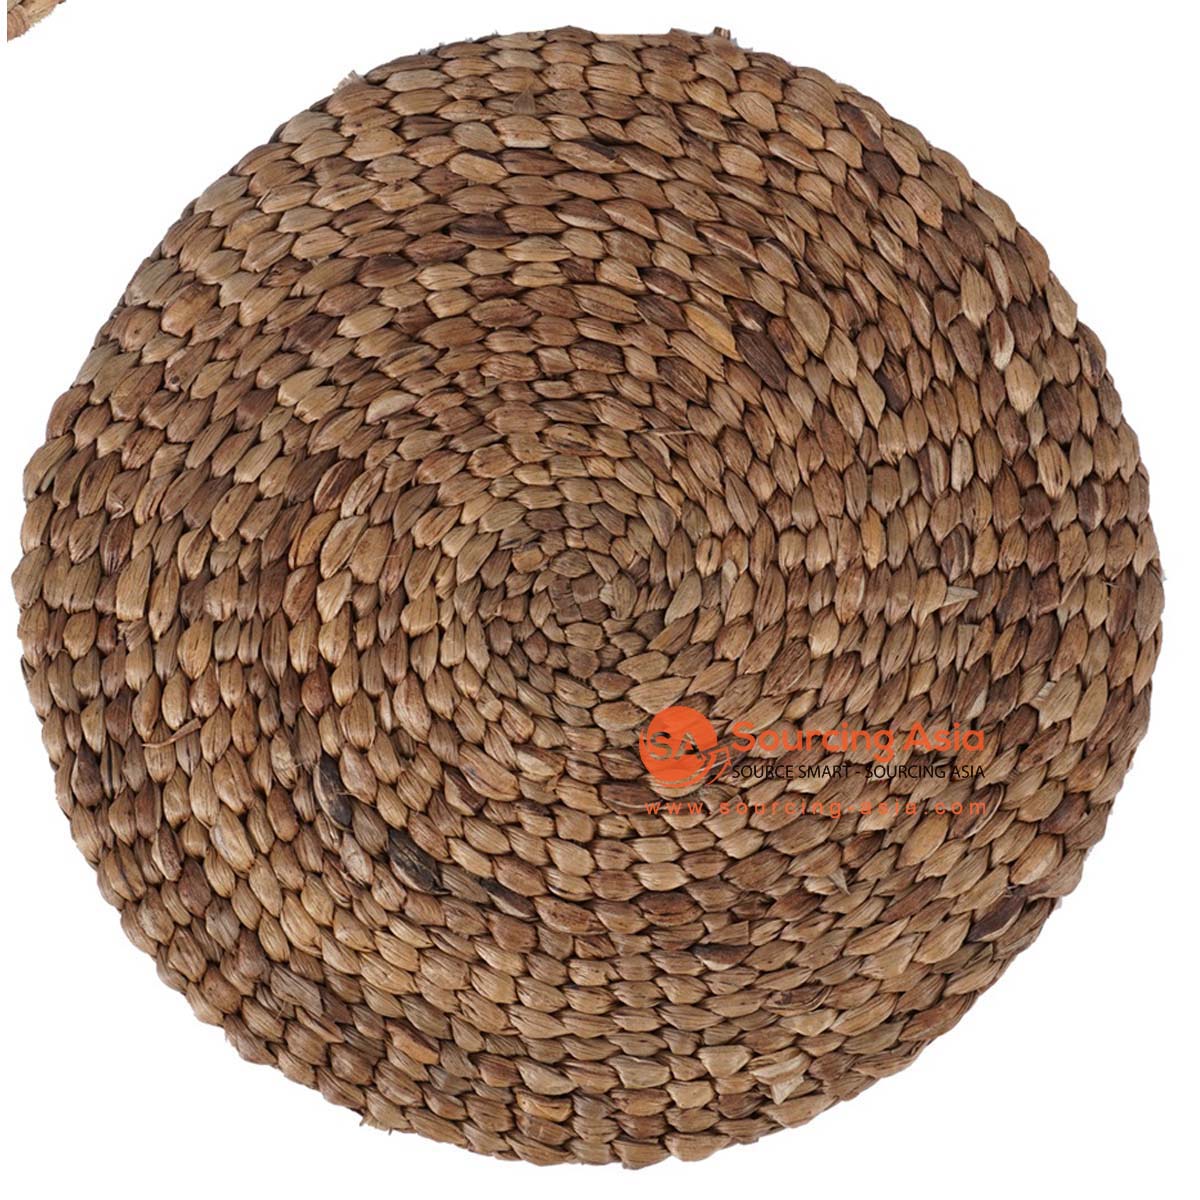 HBSC579-1 NATURAL WATER HYACINTH ROUND PLACEMAT